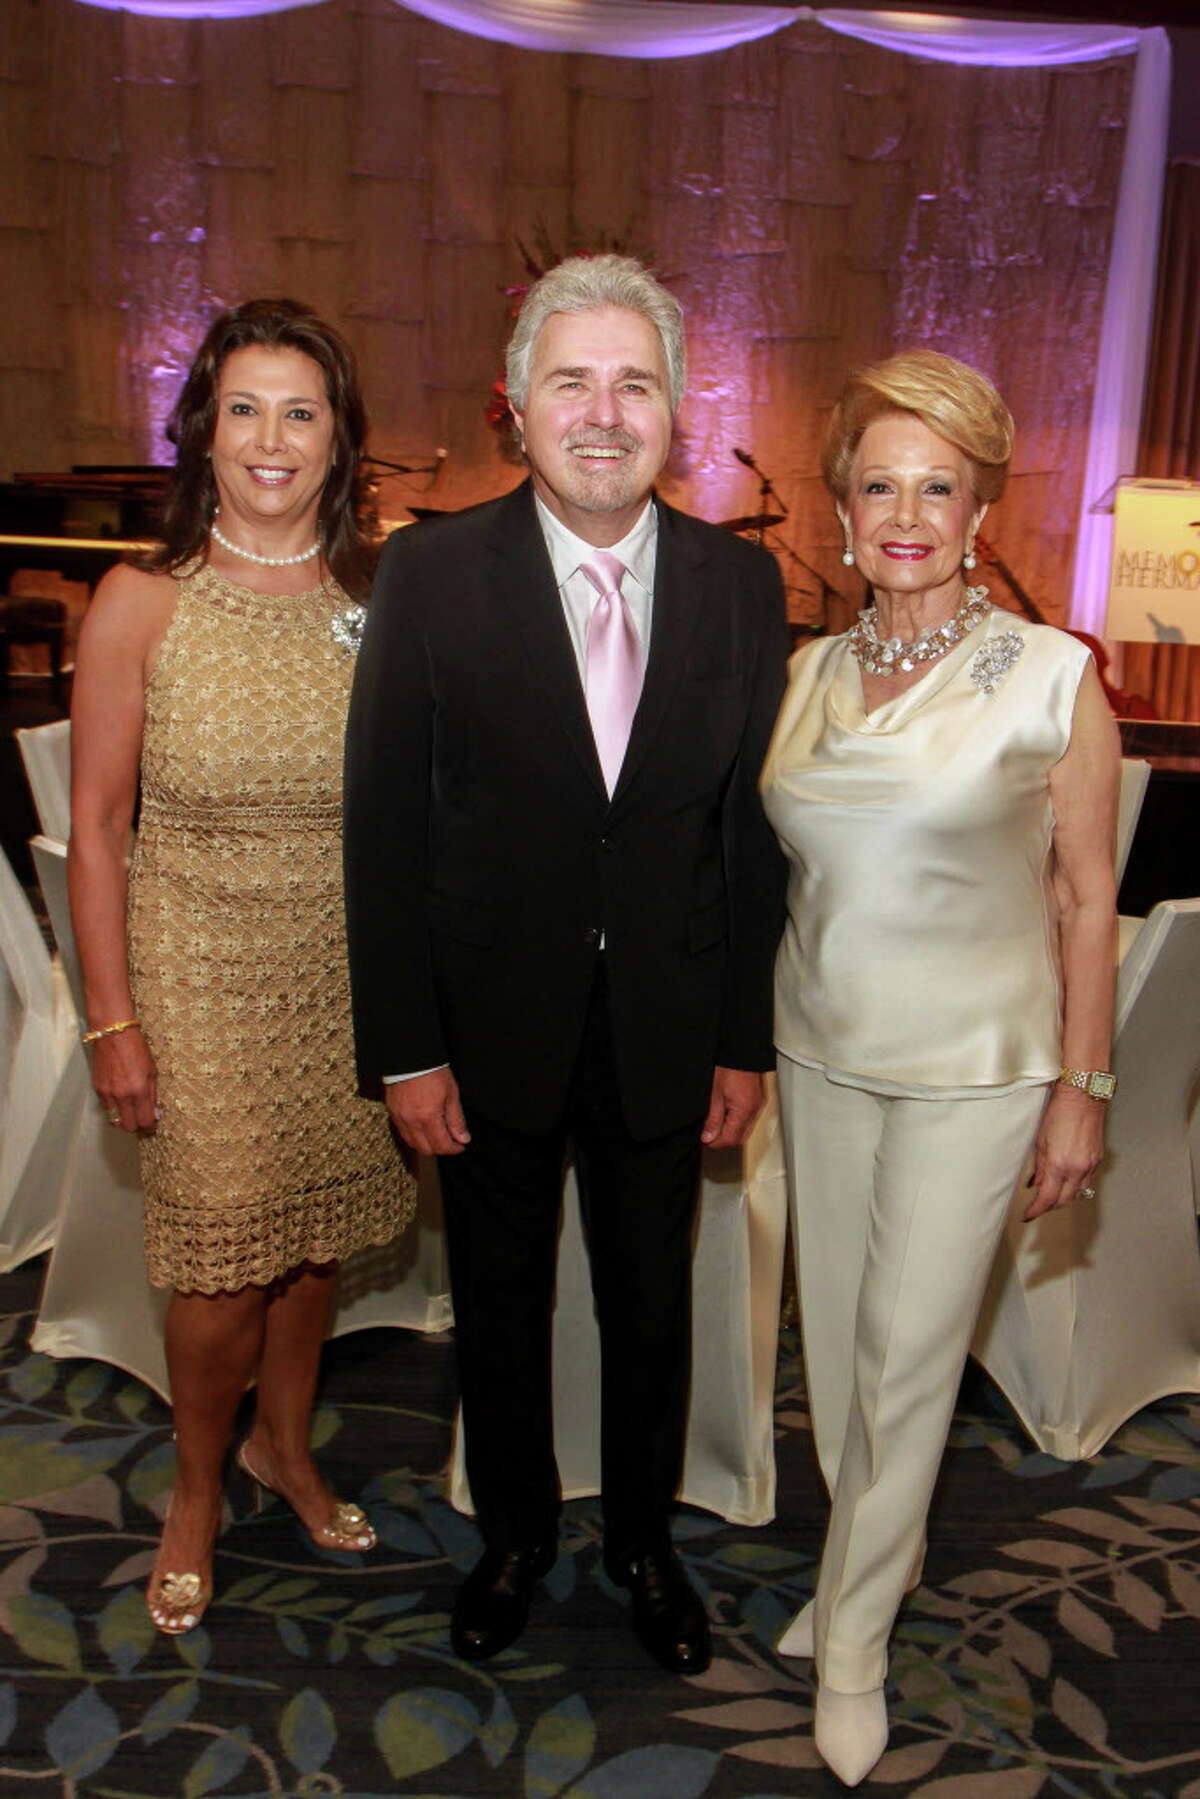 Regina Garcia, from left, Steve Tyrell and Philamena Baird at the Memorial Hermann Razzle Dazzle luncheon at the Westin Memorial City. Regina and Philamena are the event's chairs. (For the Chronicle/Gary Fountain, October 12, 2017)